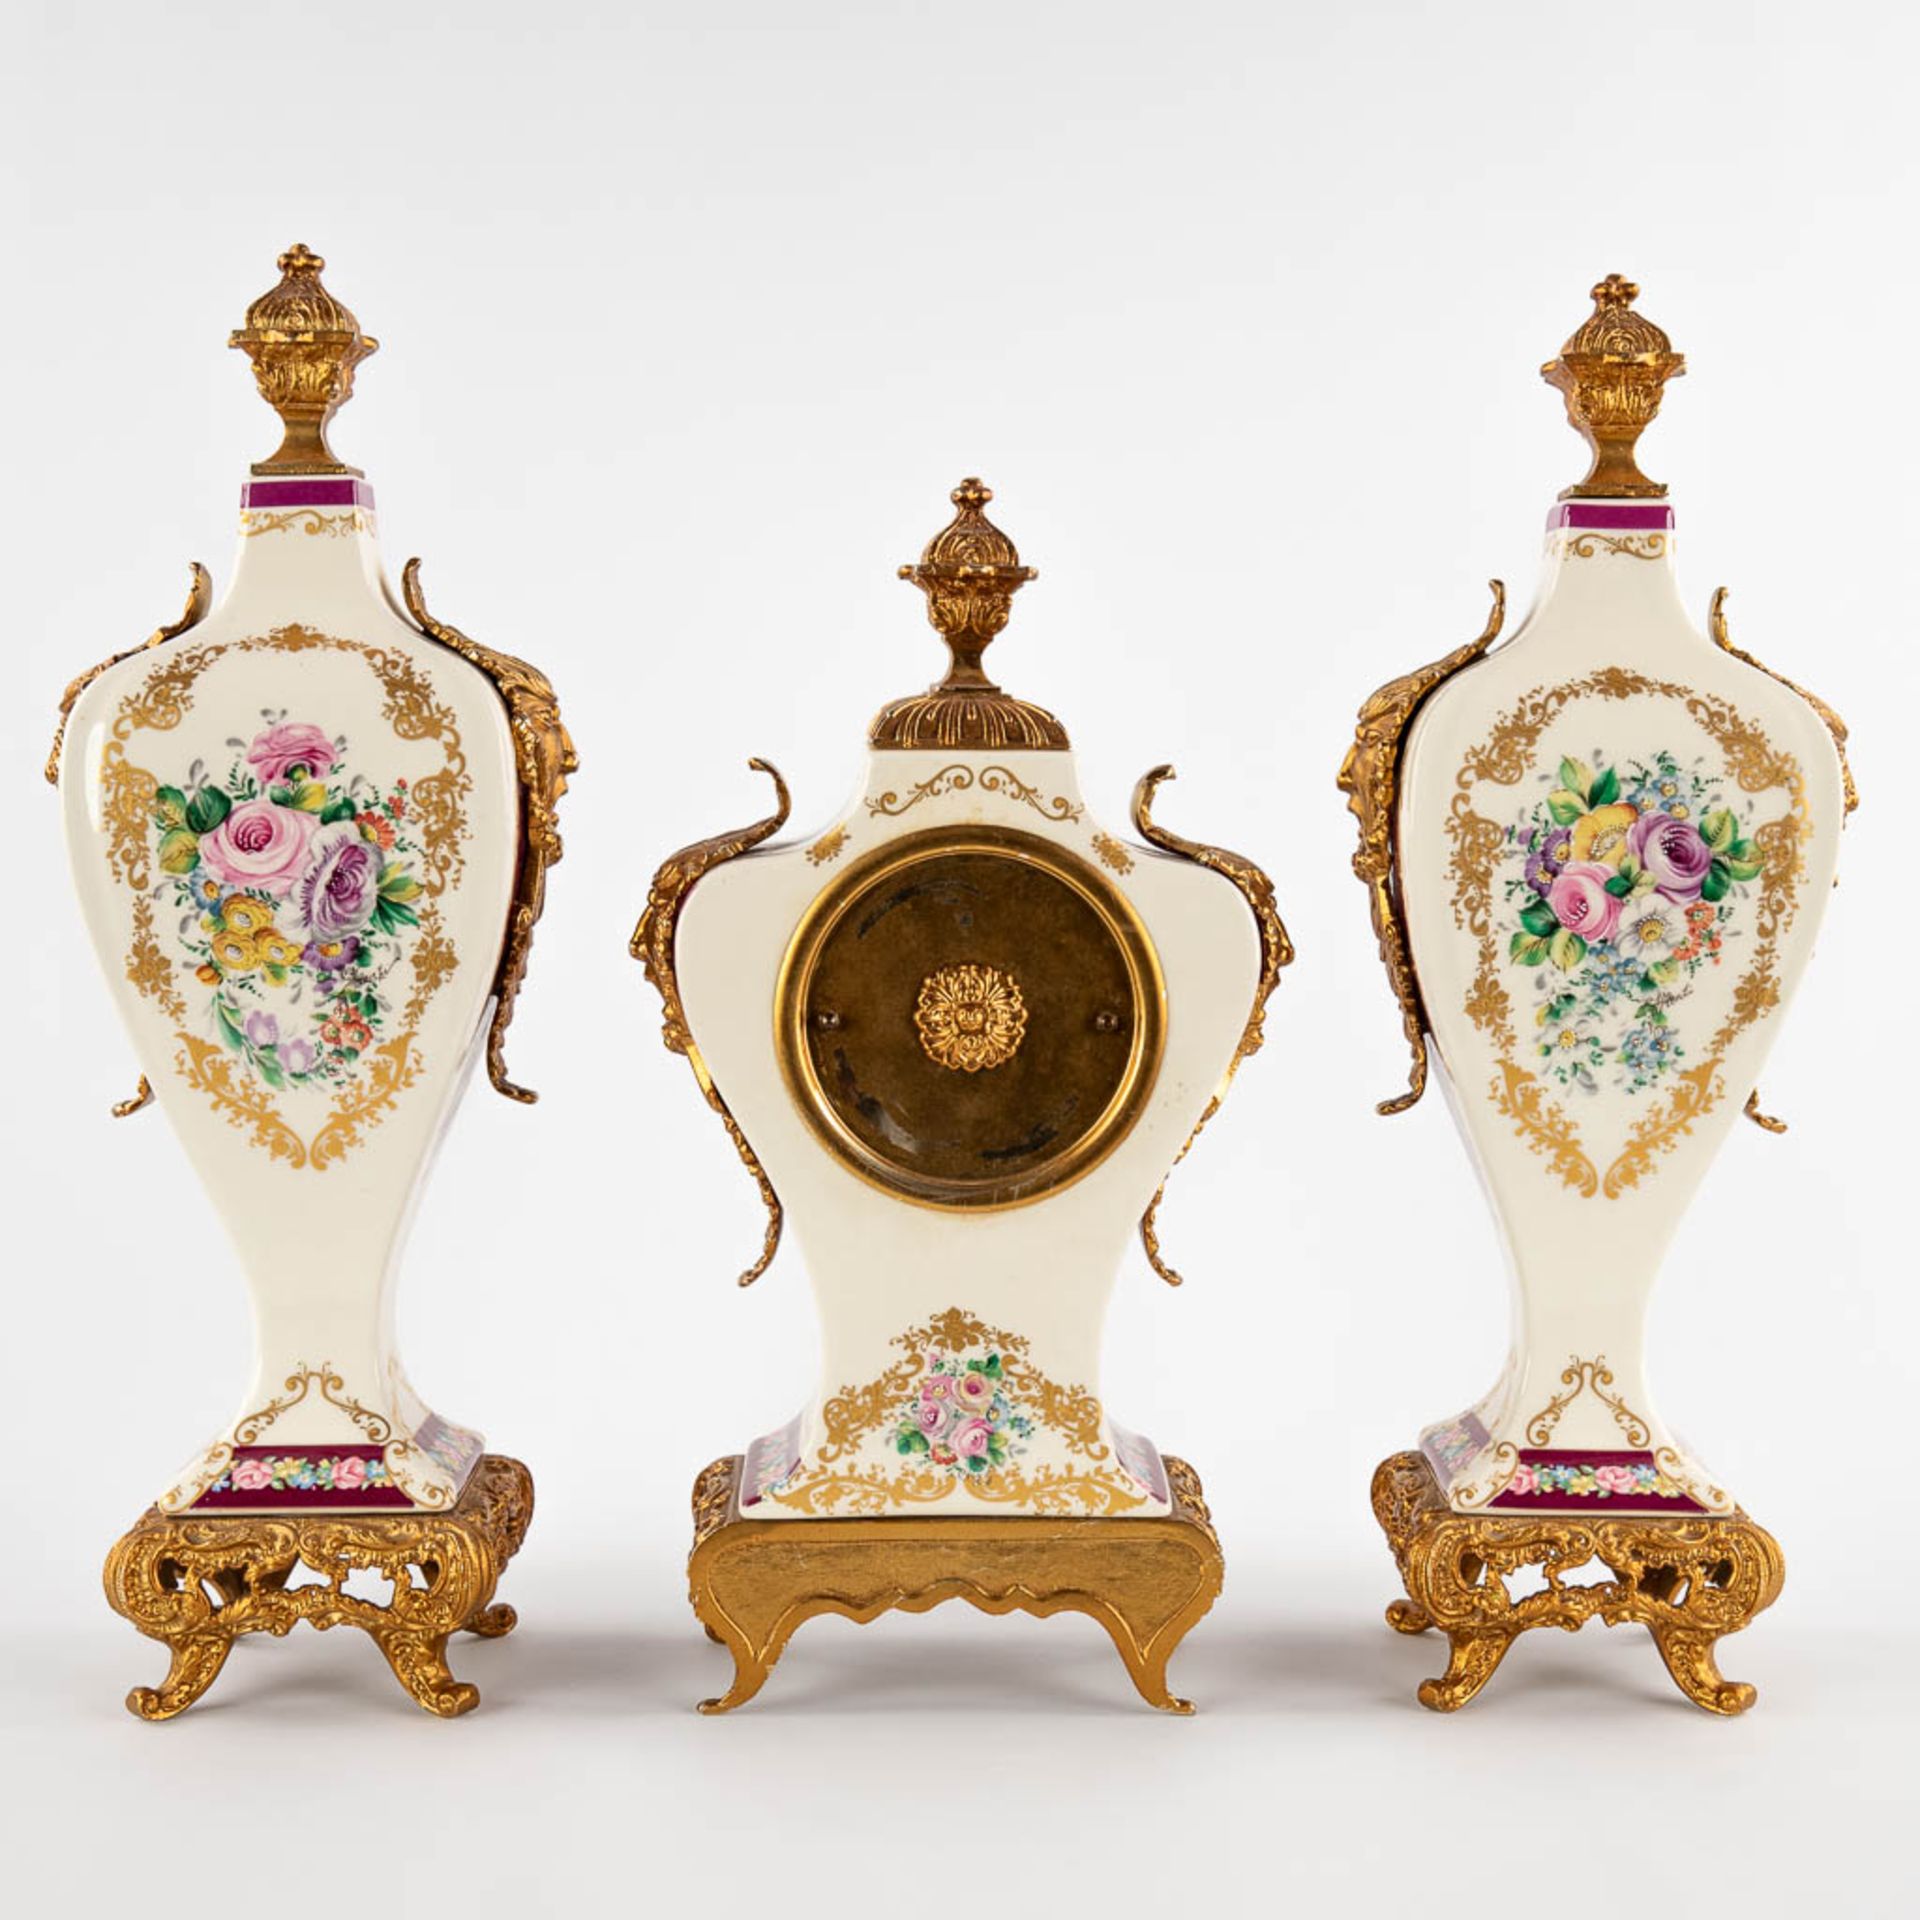 A three-piece mantle garniture clock and side pieces, porcelain mounted with bronze and floral decor - Image 5 of 14